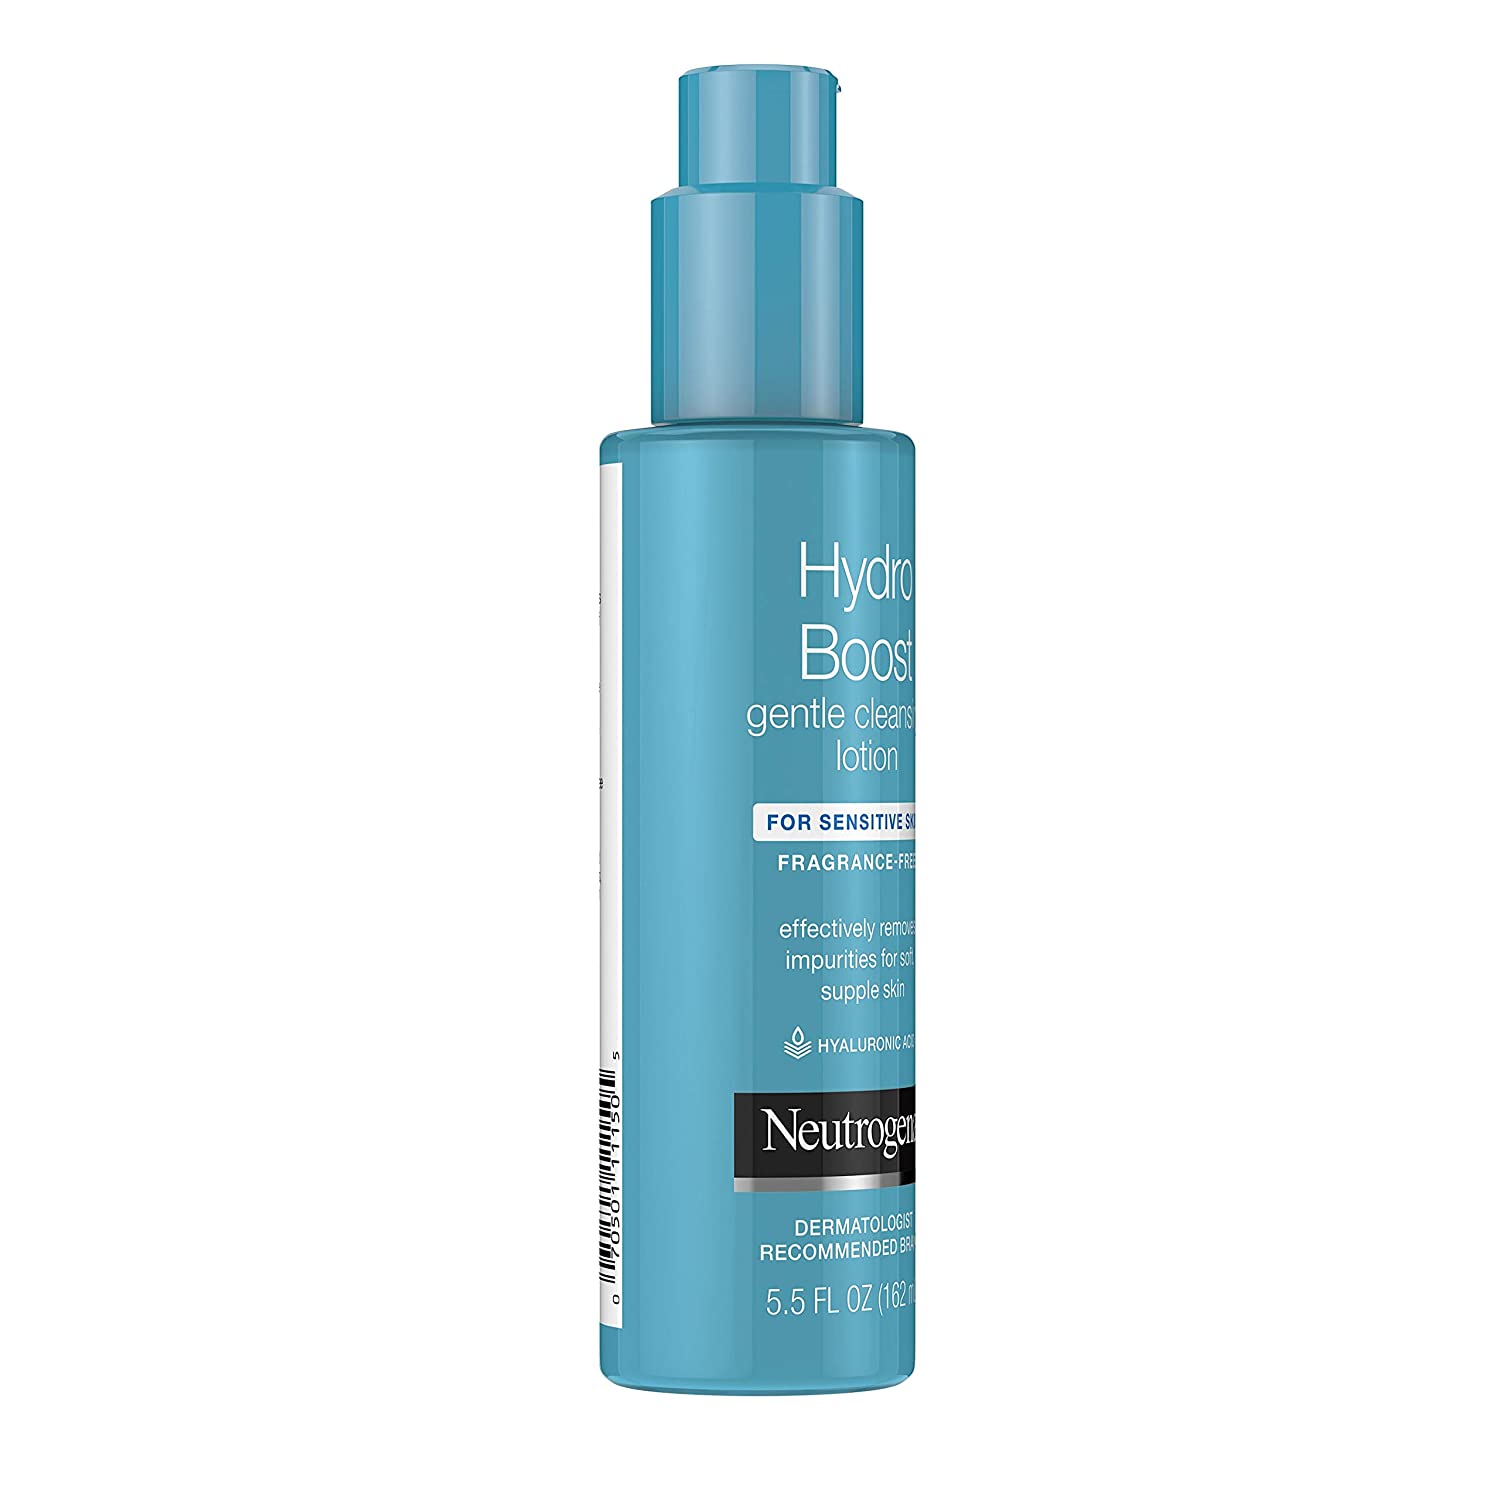 Neutrogena Hydro Boost Gentle Cleansing Lotion 5 oz (Pack of 2) - image 3 of 6